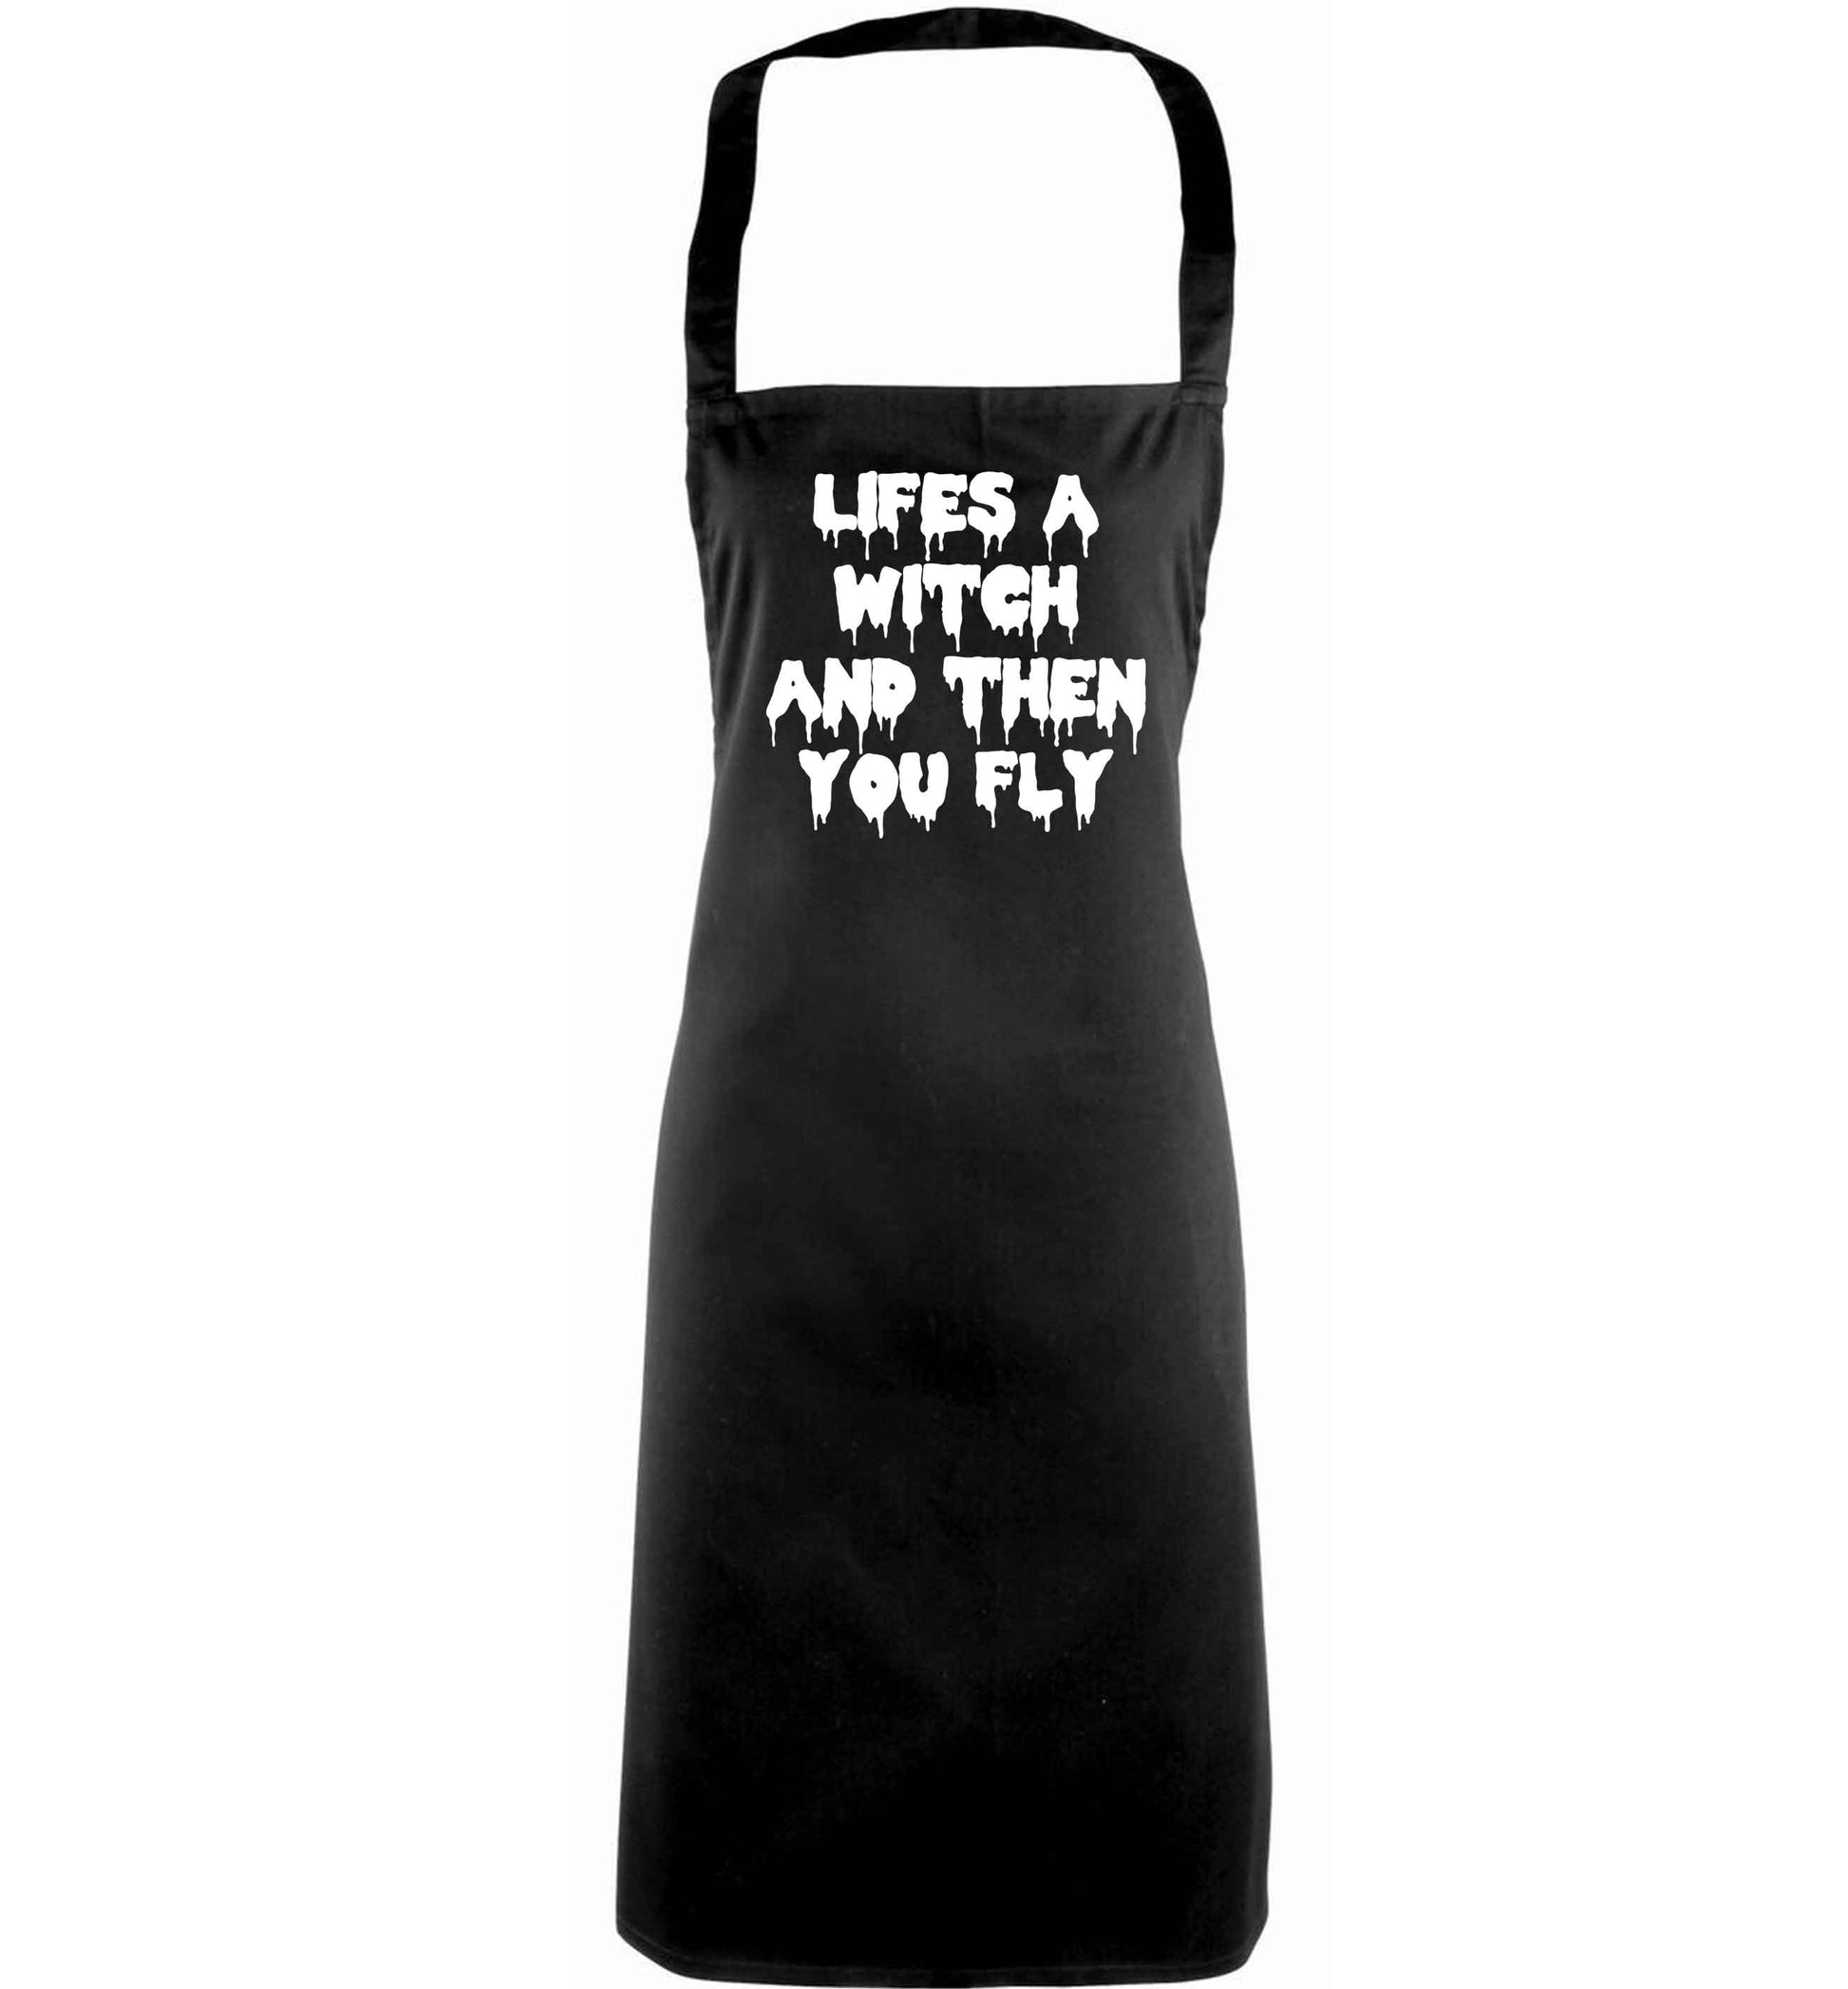 Life's a witch and then you fly adults black apron